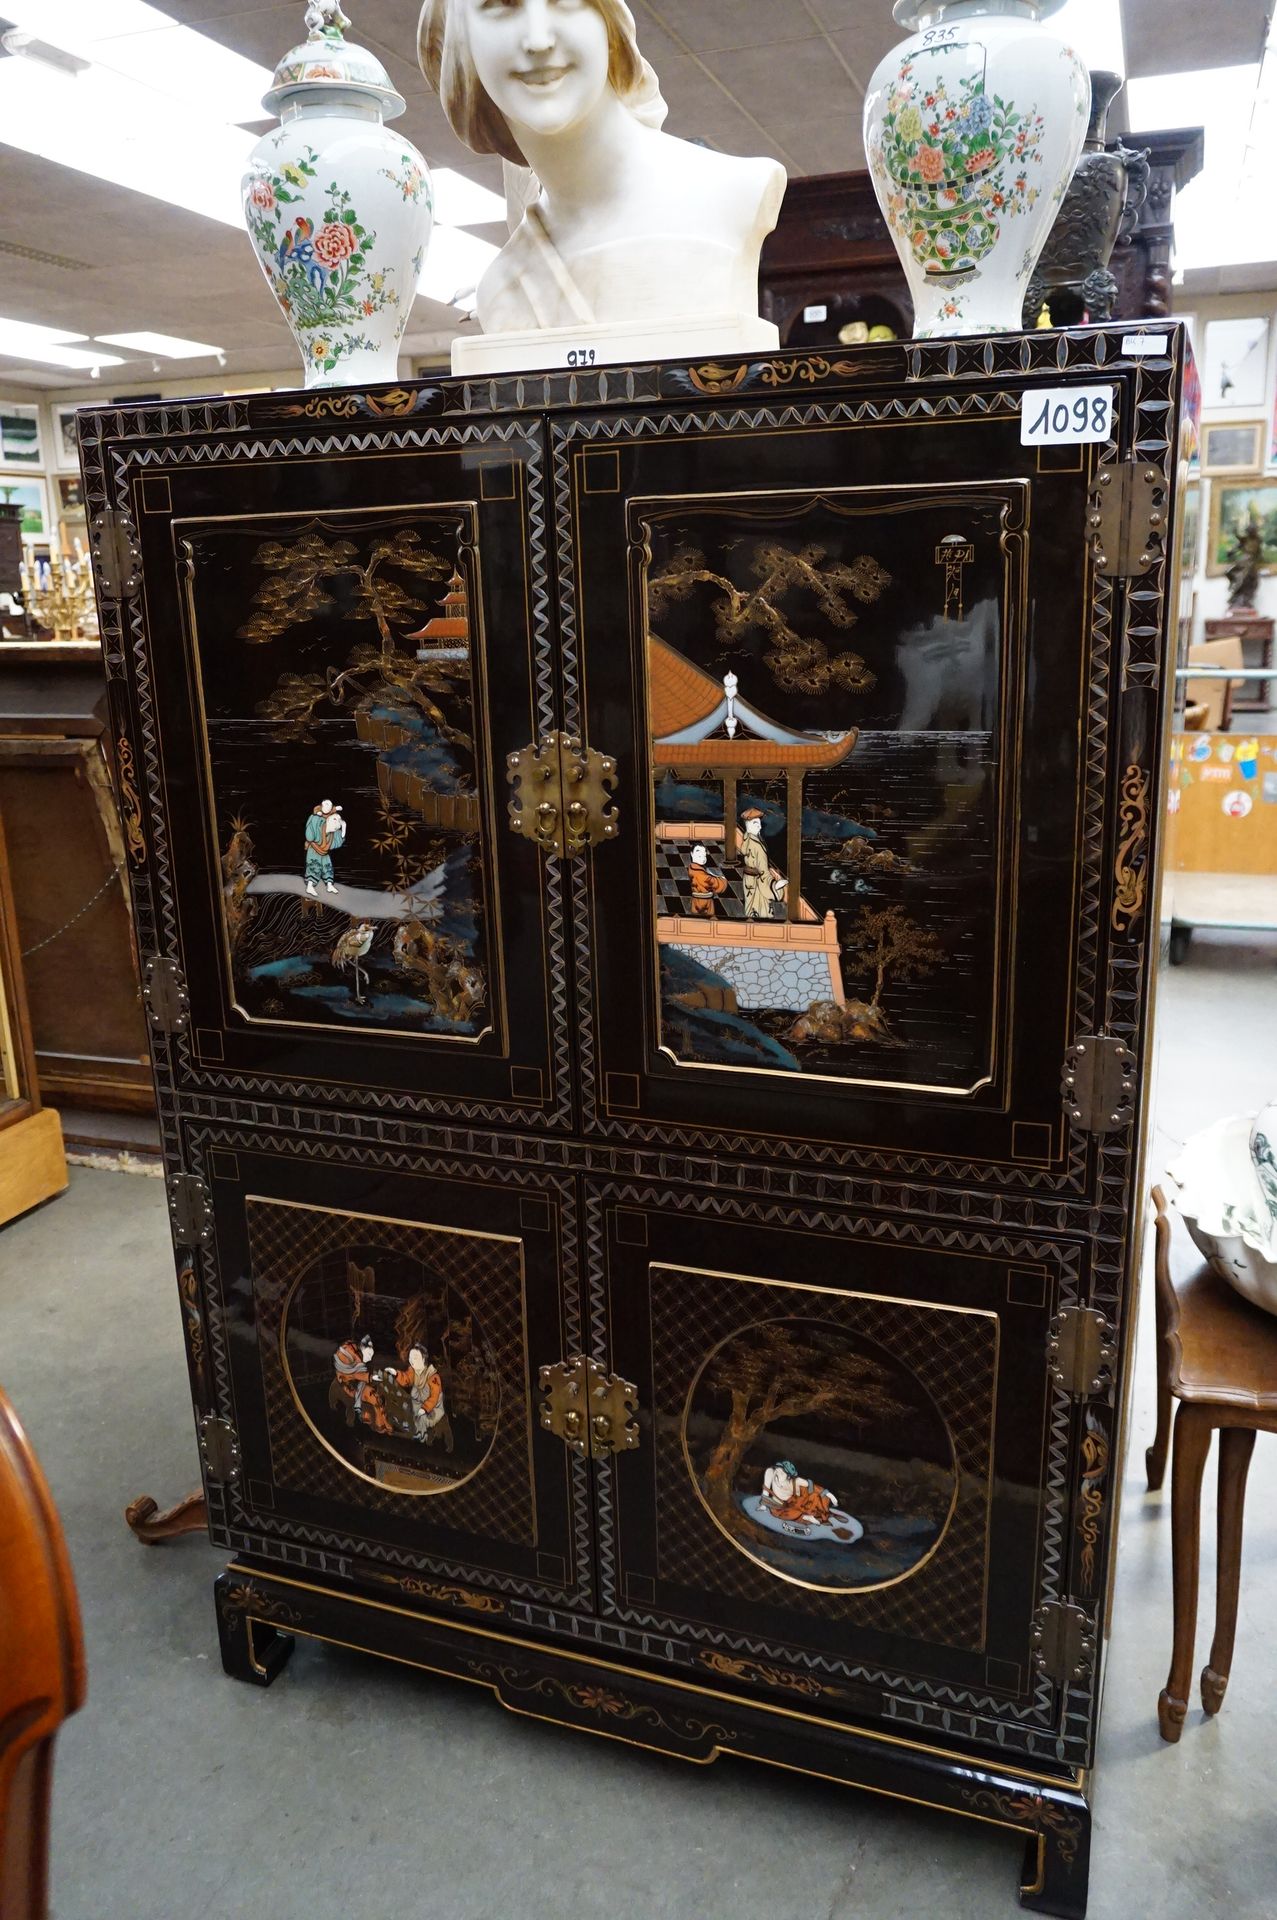 Null Cabinet in Laque de Chine - With 4 doors - Decor with characters